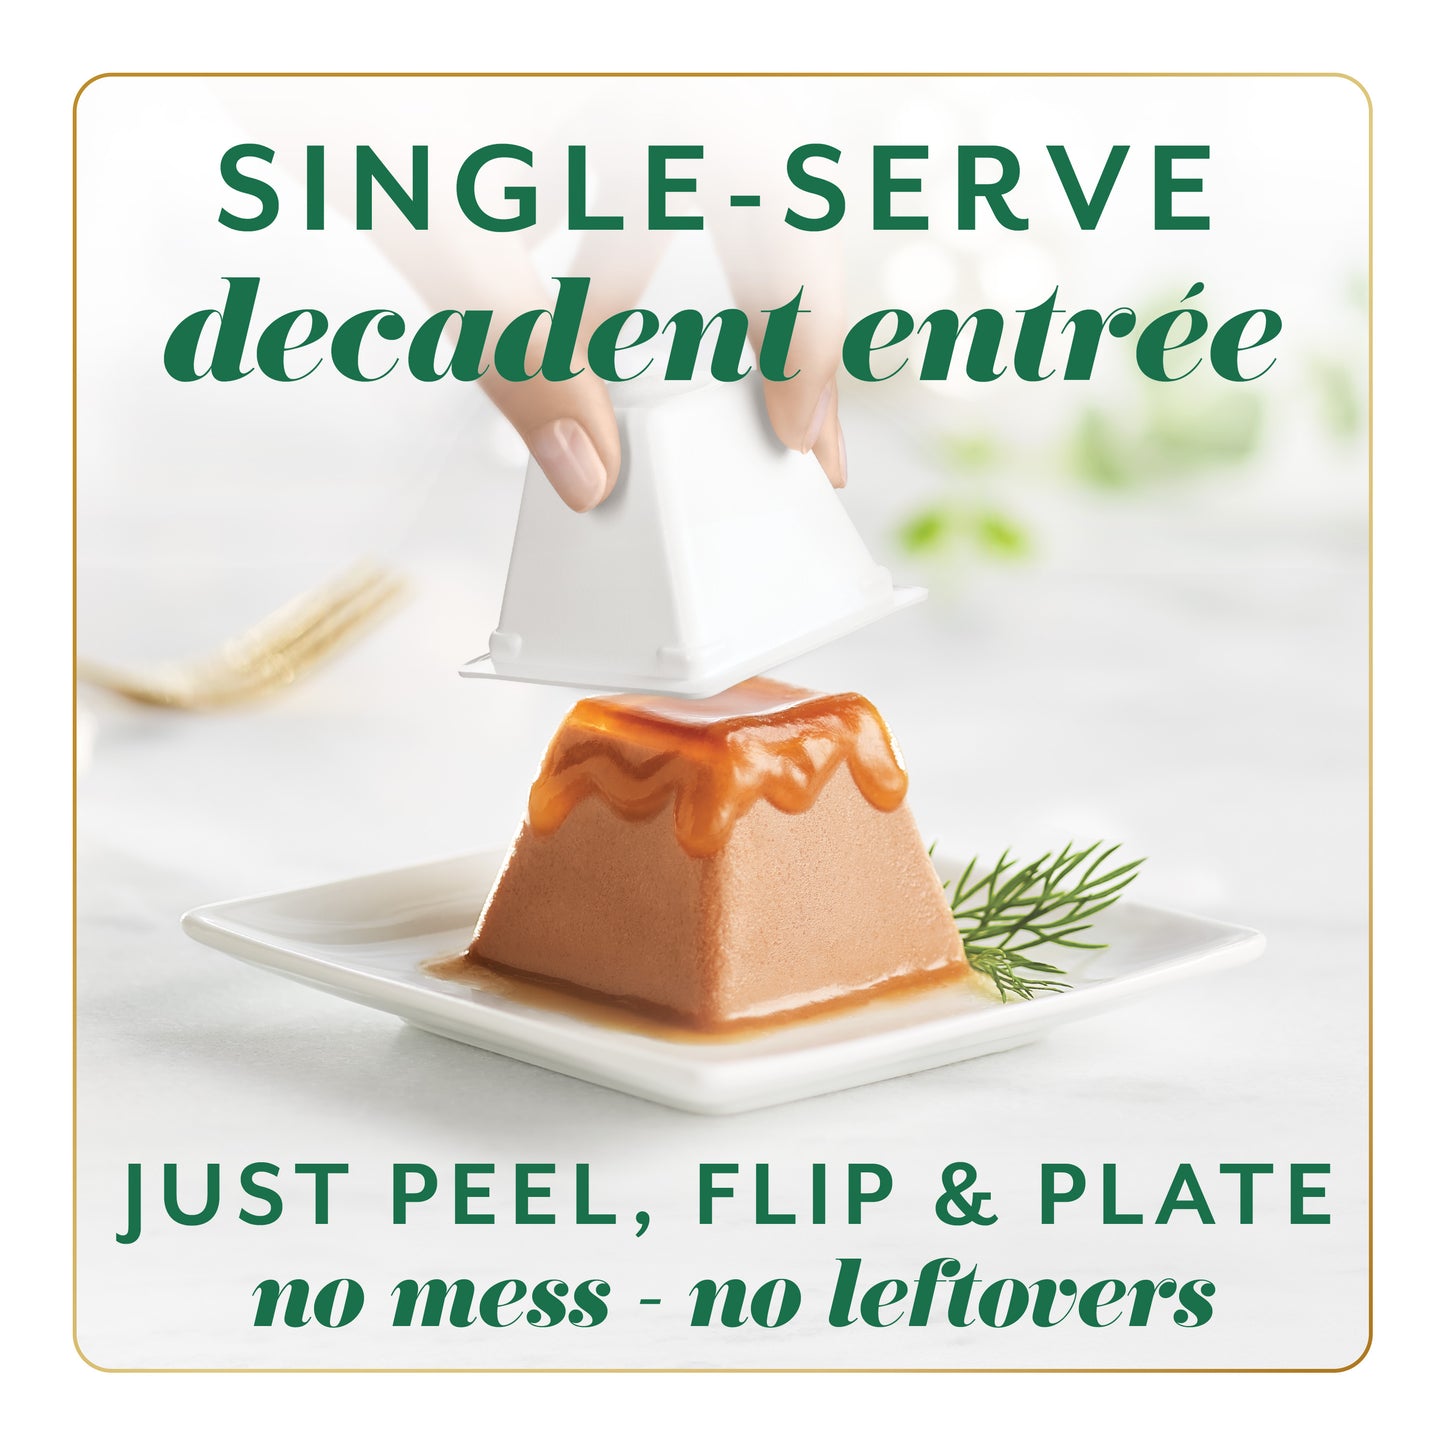 single-serve decadent entree. Just peel, flip and plate. No mess, no leftovers.